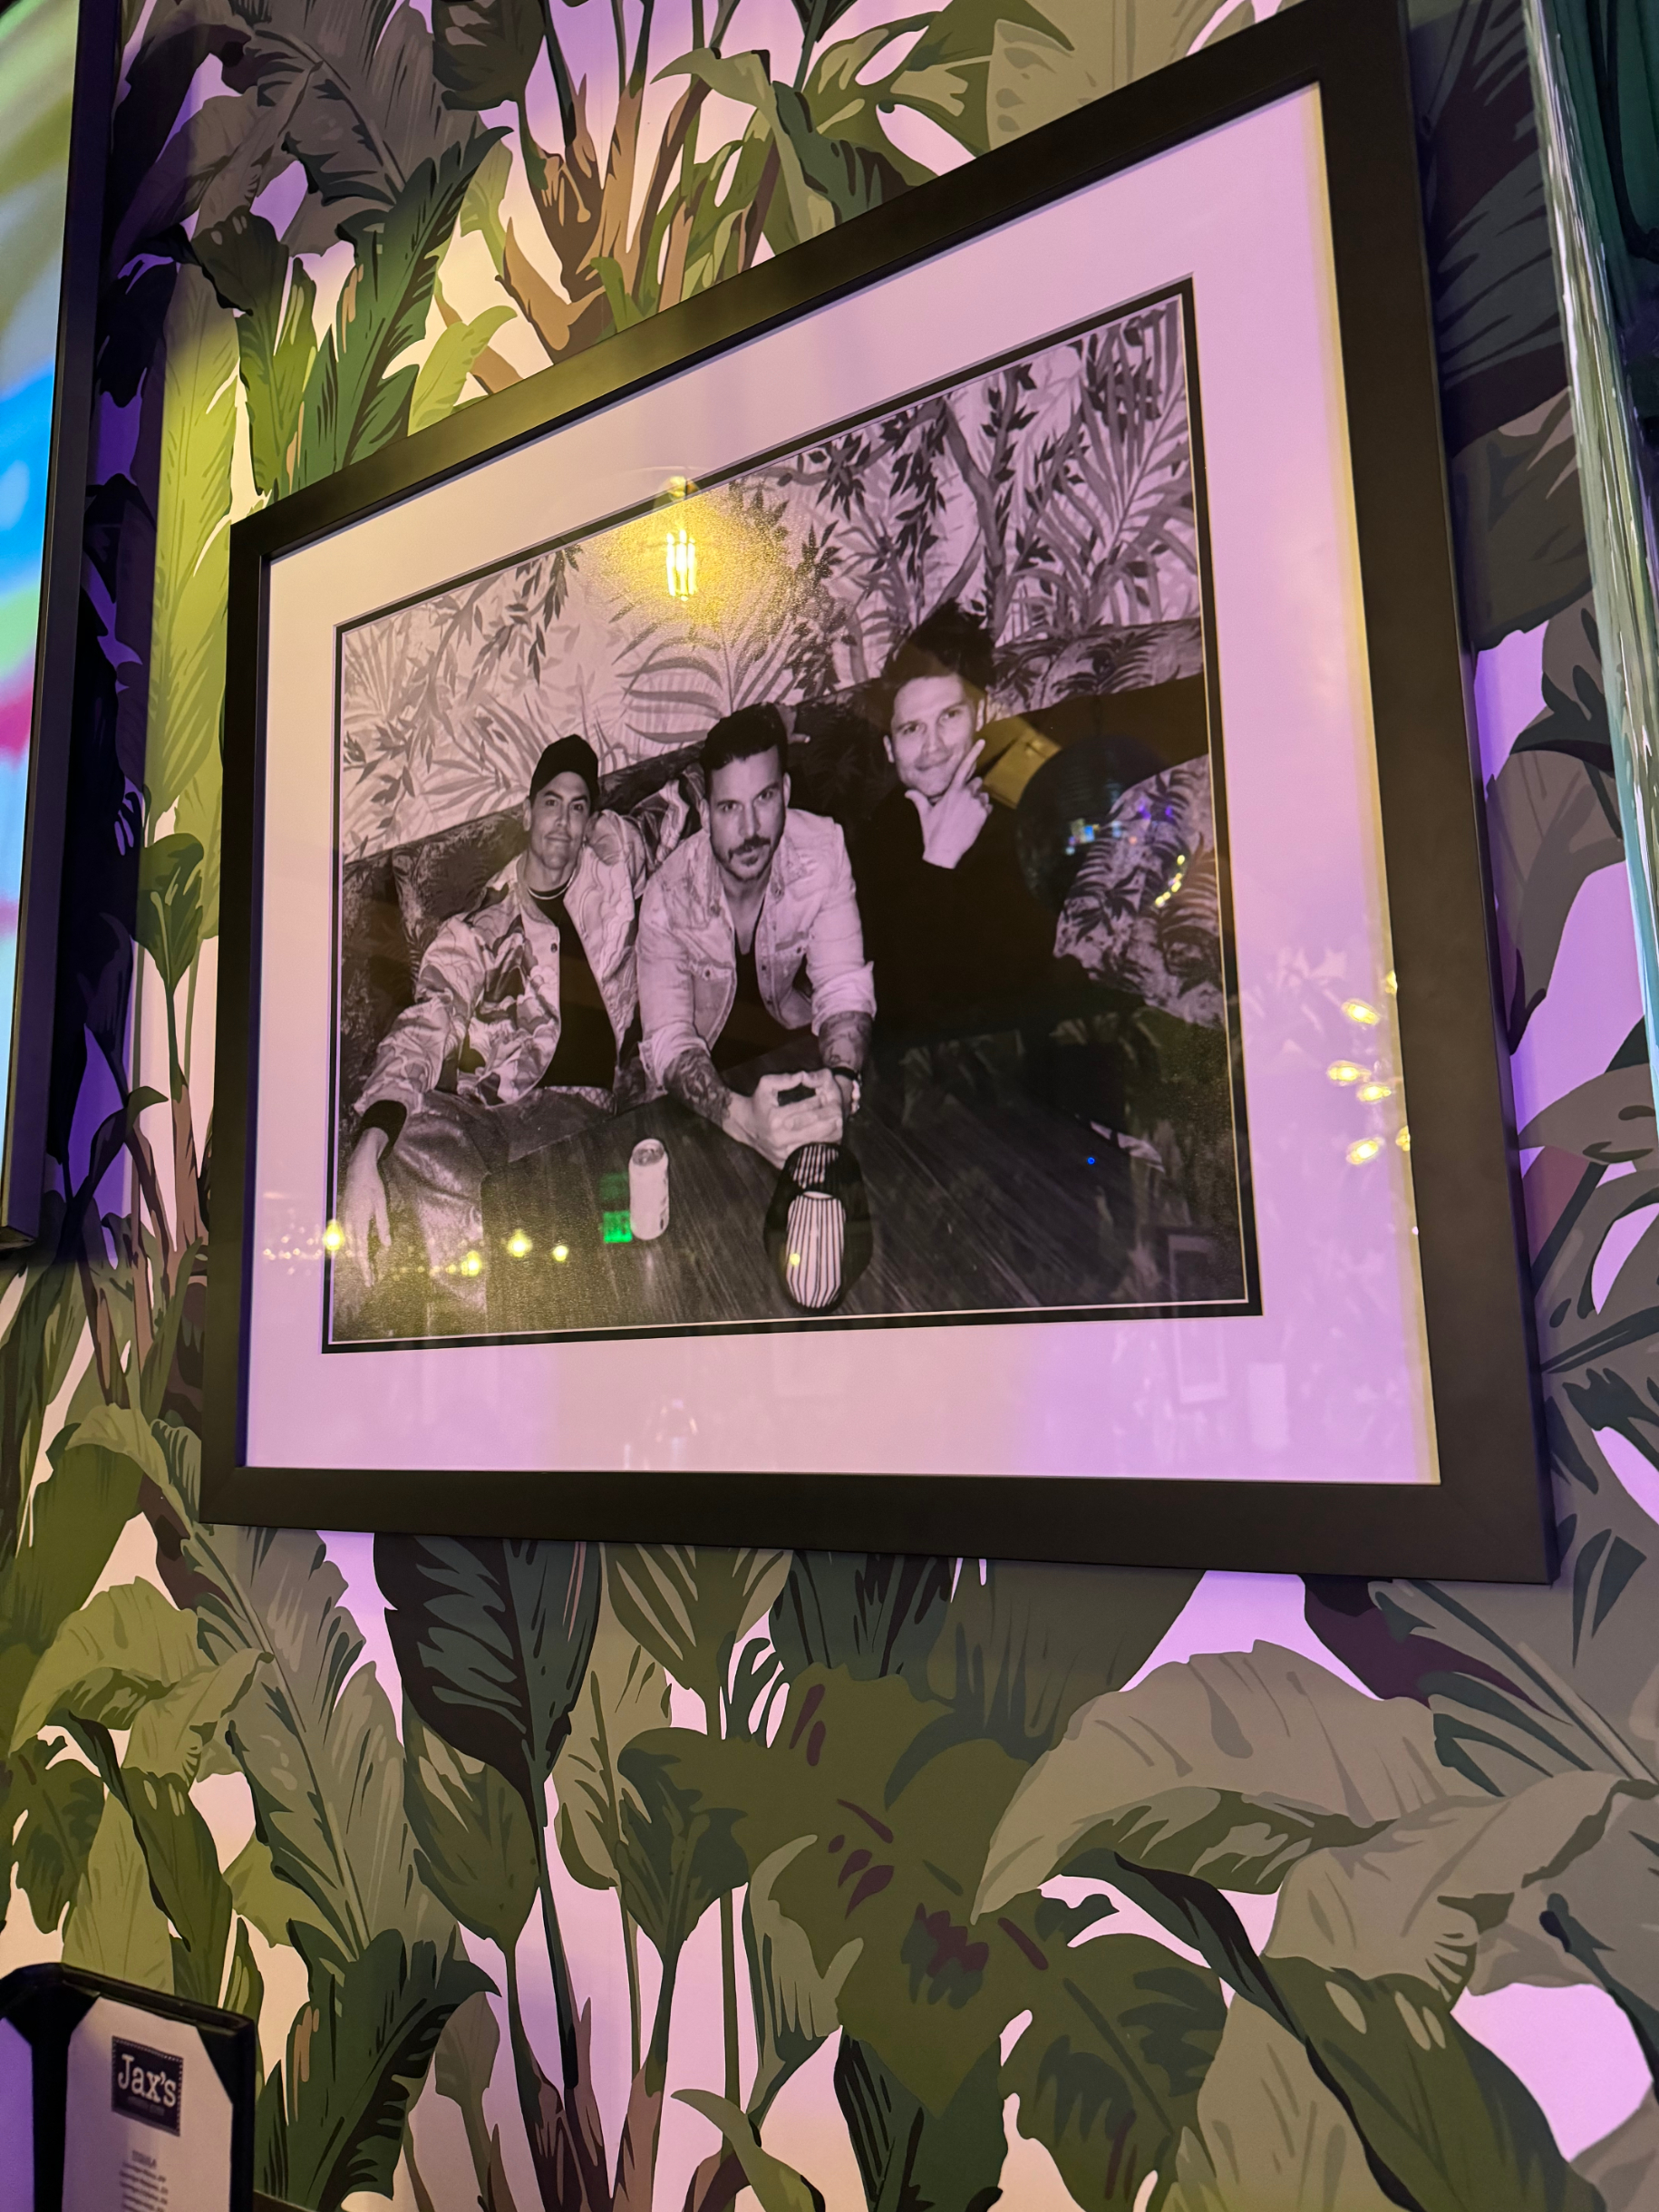 Framed photo of three individuals posing at a table, mounted on a wall with a leaf patterned wallpaper